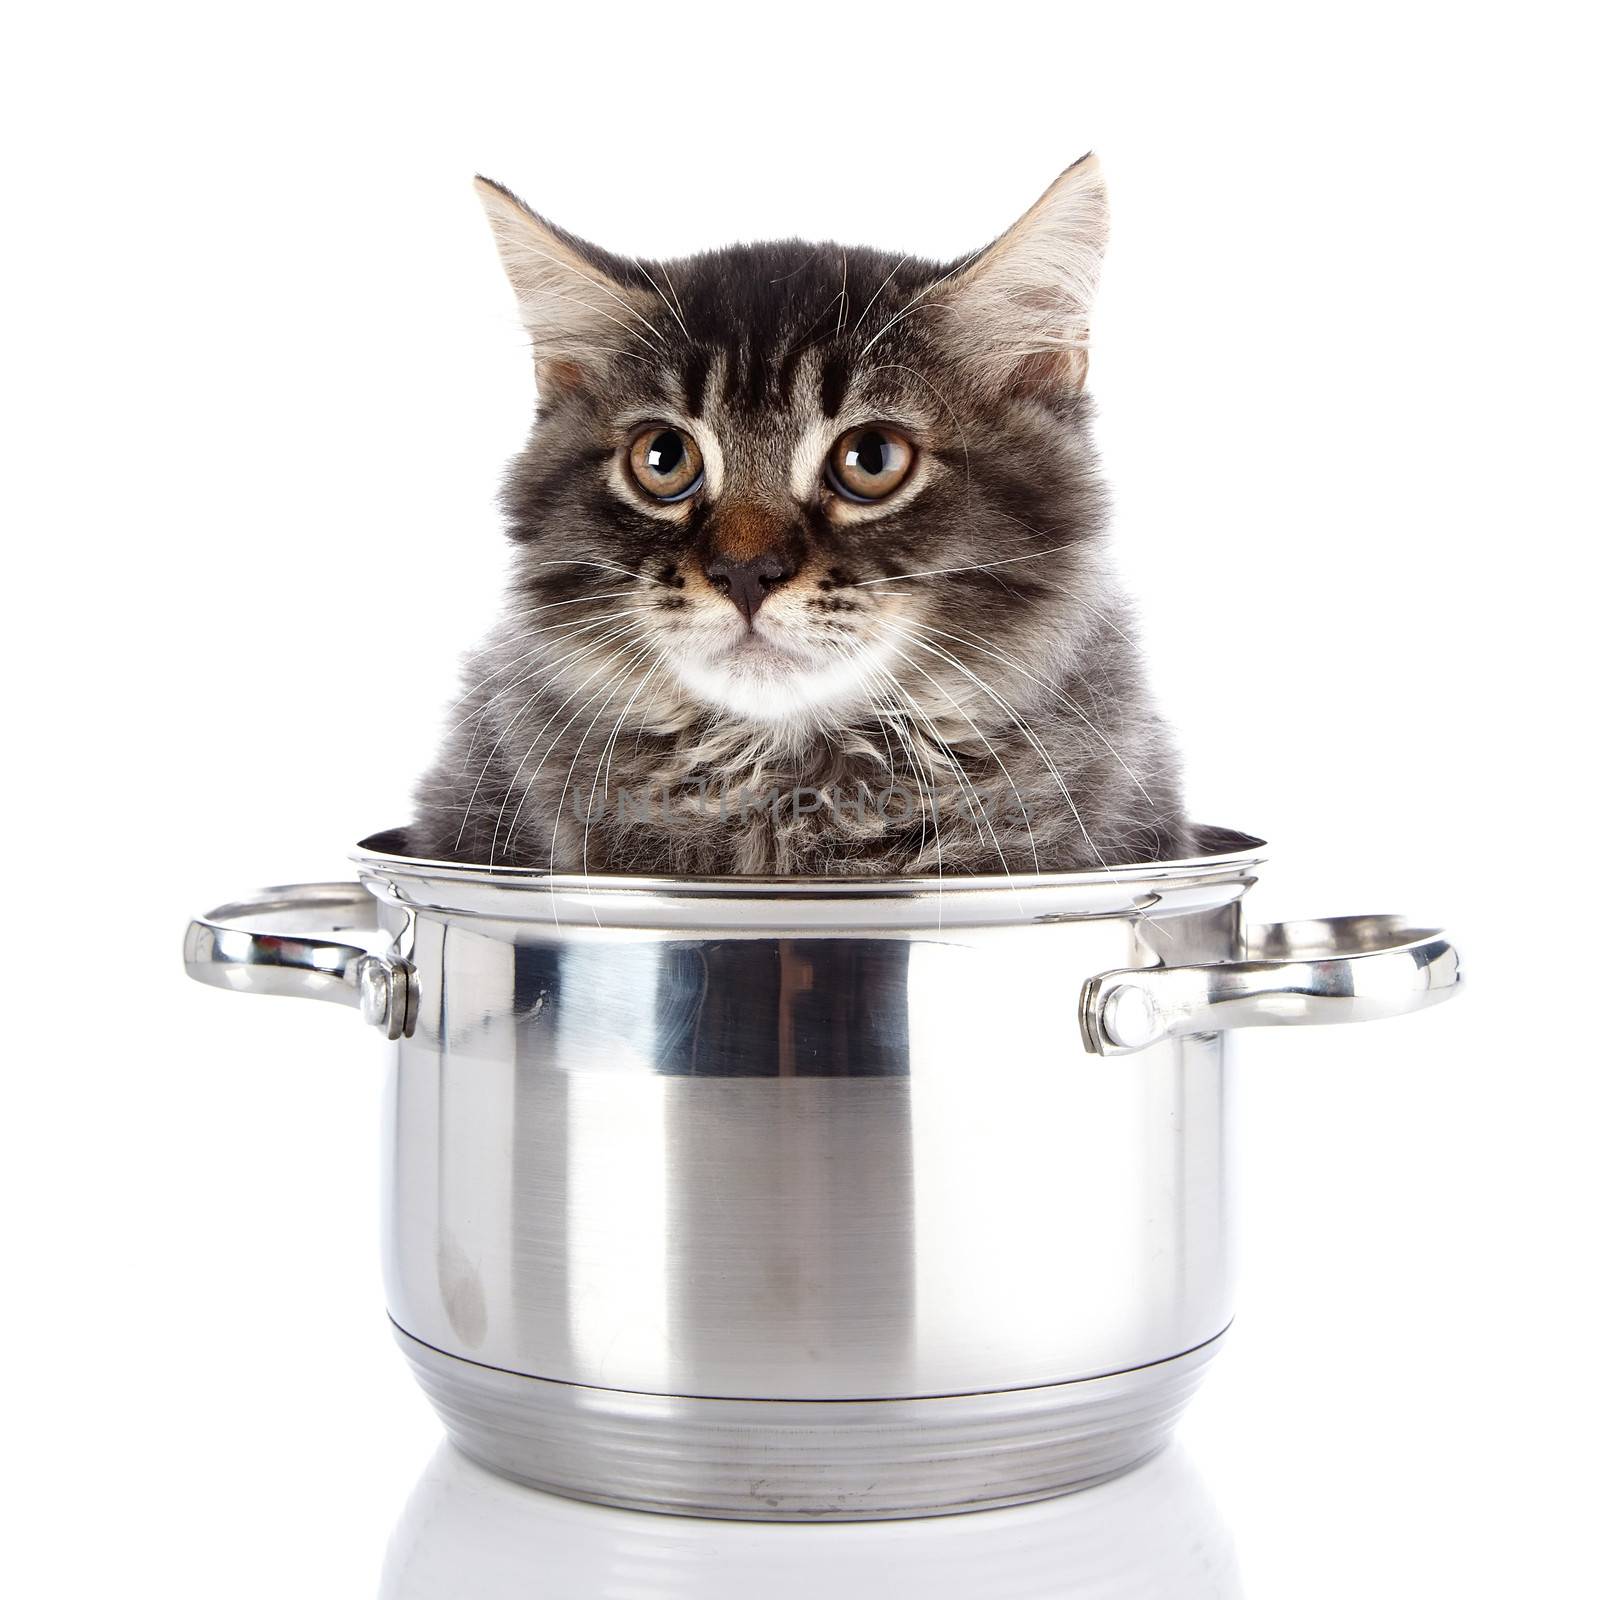 Fluffy cat in a pan.  Striped not purebred kitten. Kitten on a white background. Small predator. Small cat.